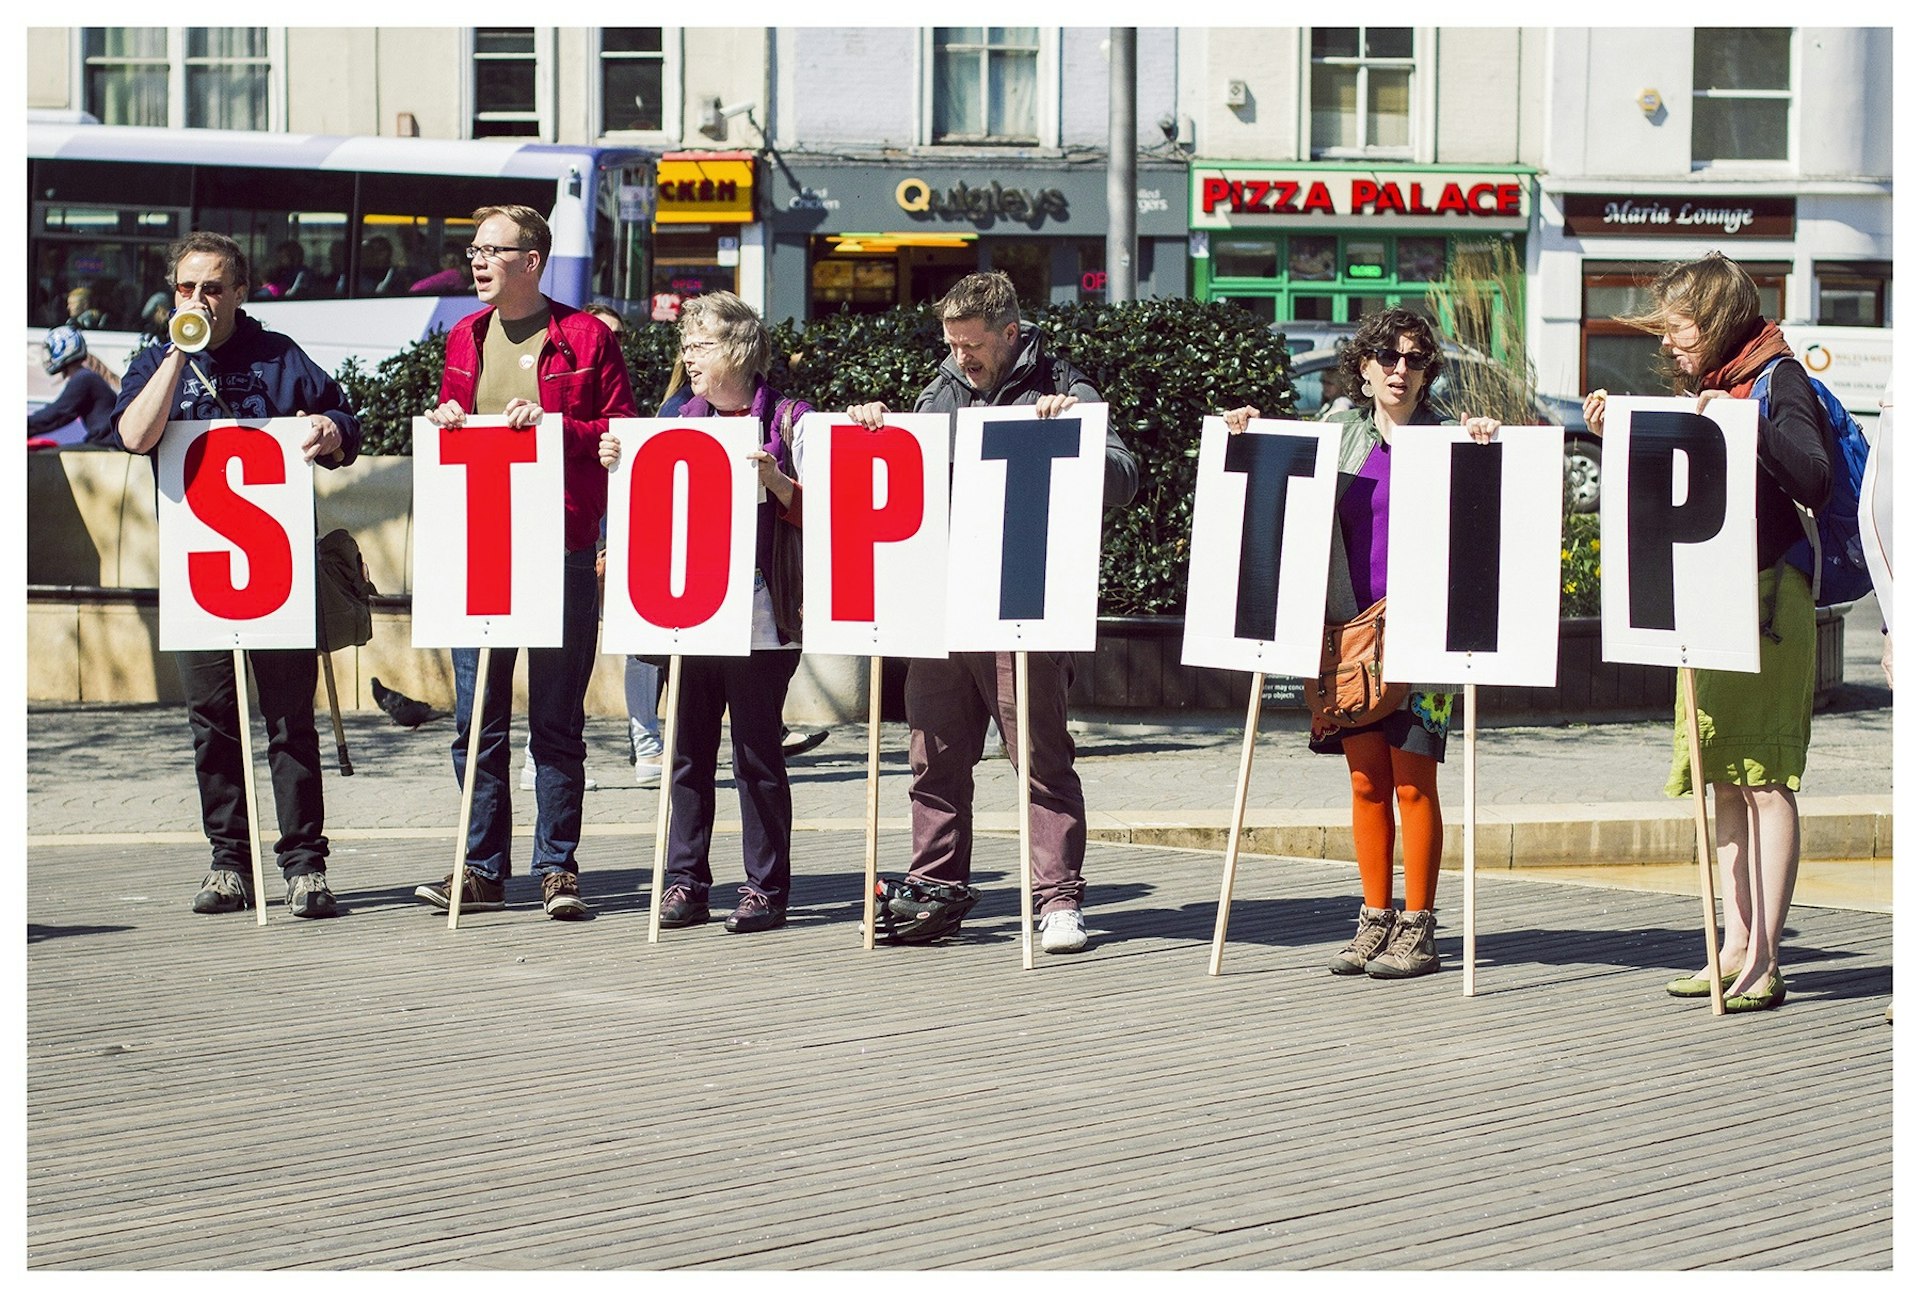 An Idiot's Guide to TTIP: The Transatlantic Trade and Investment Partnership